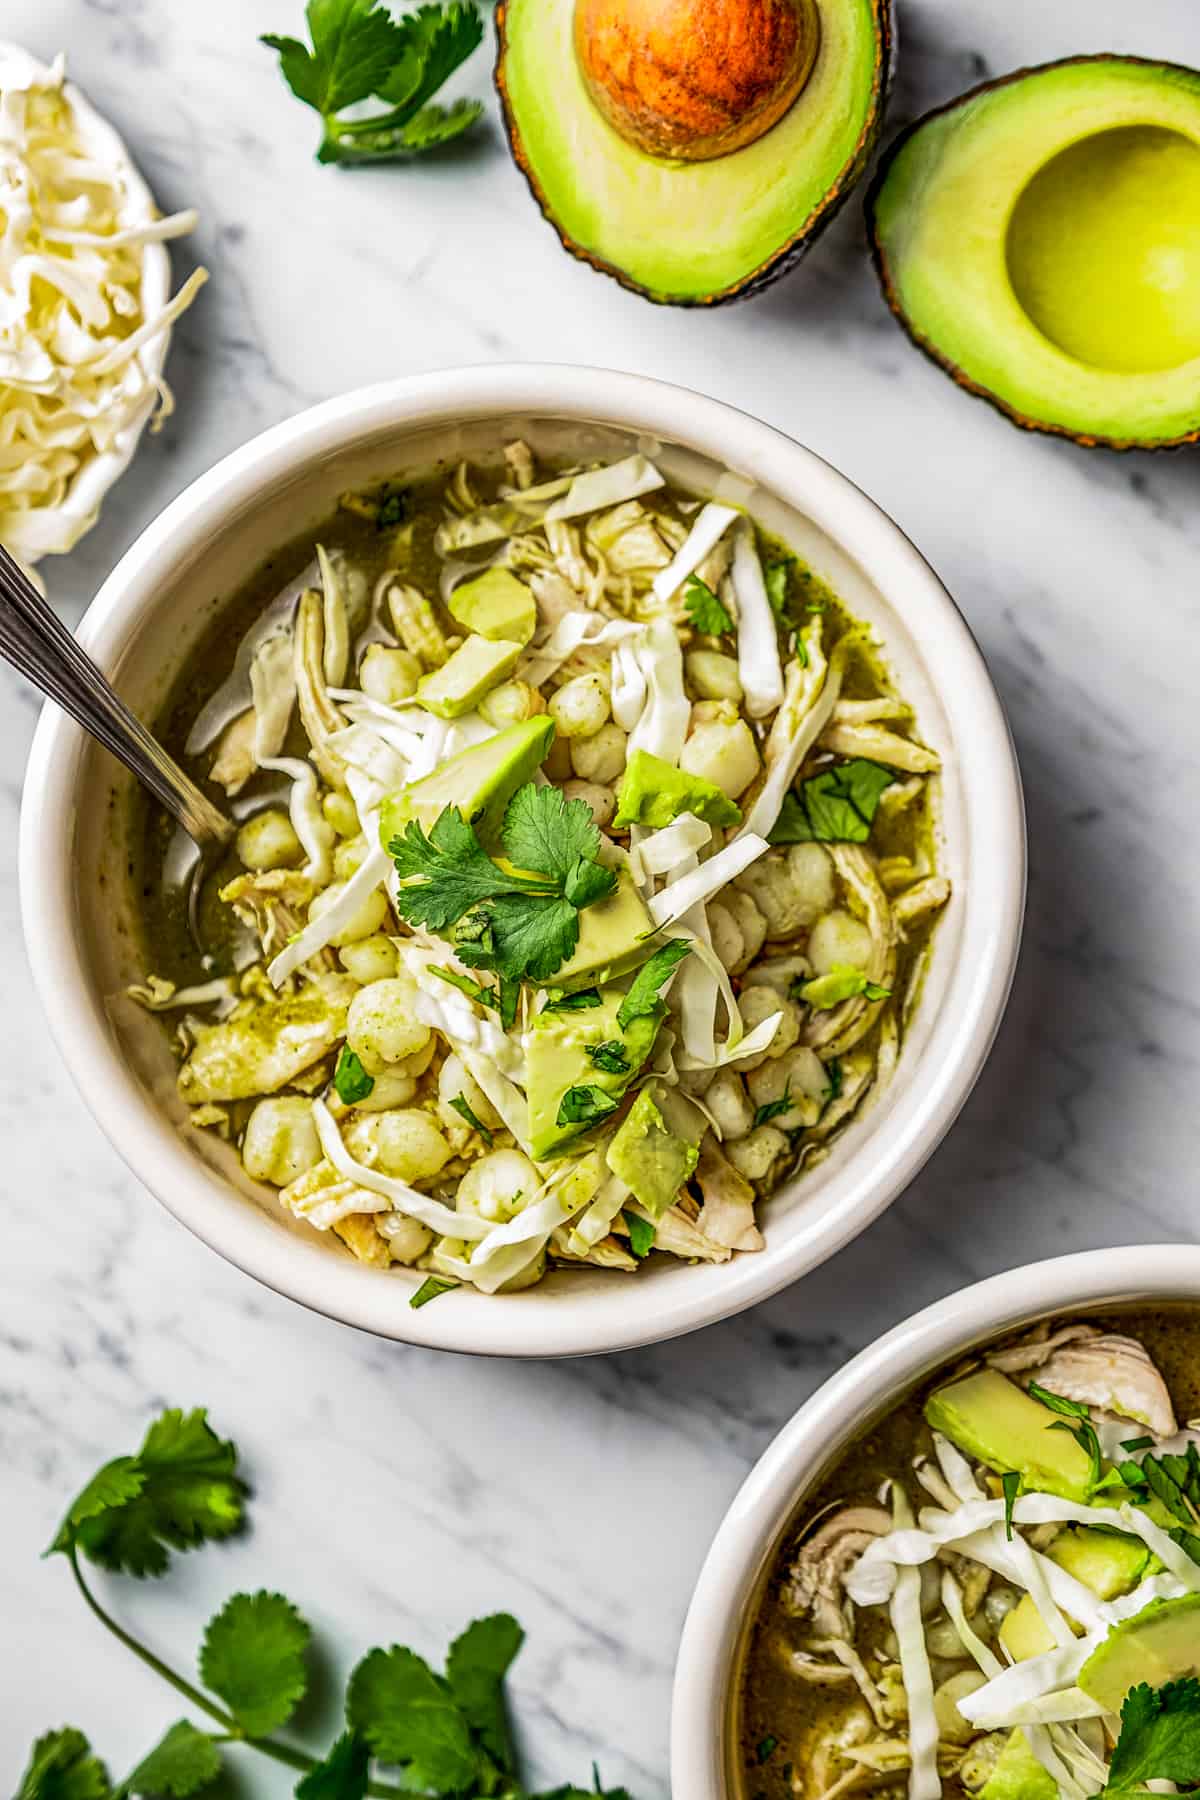 Two bowls of pozole verde in bowls with garnishes near cilantro, avocado, and shredded cabbage.